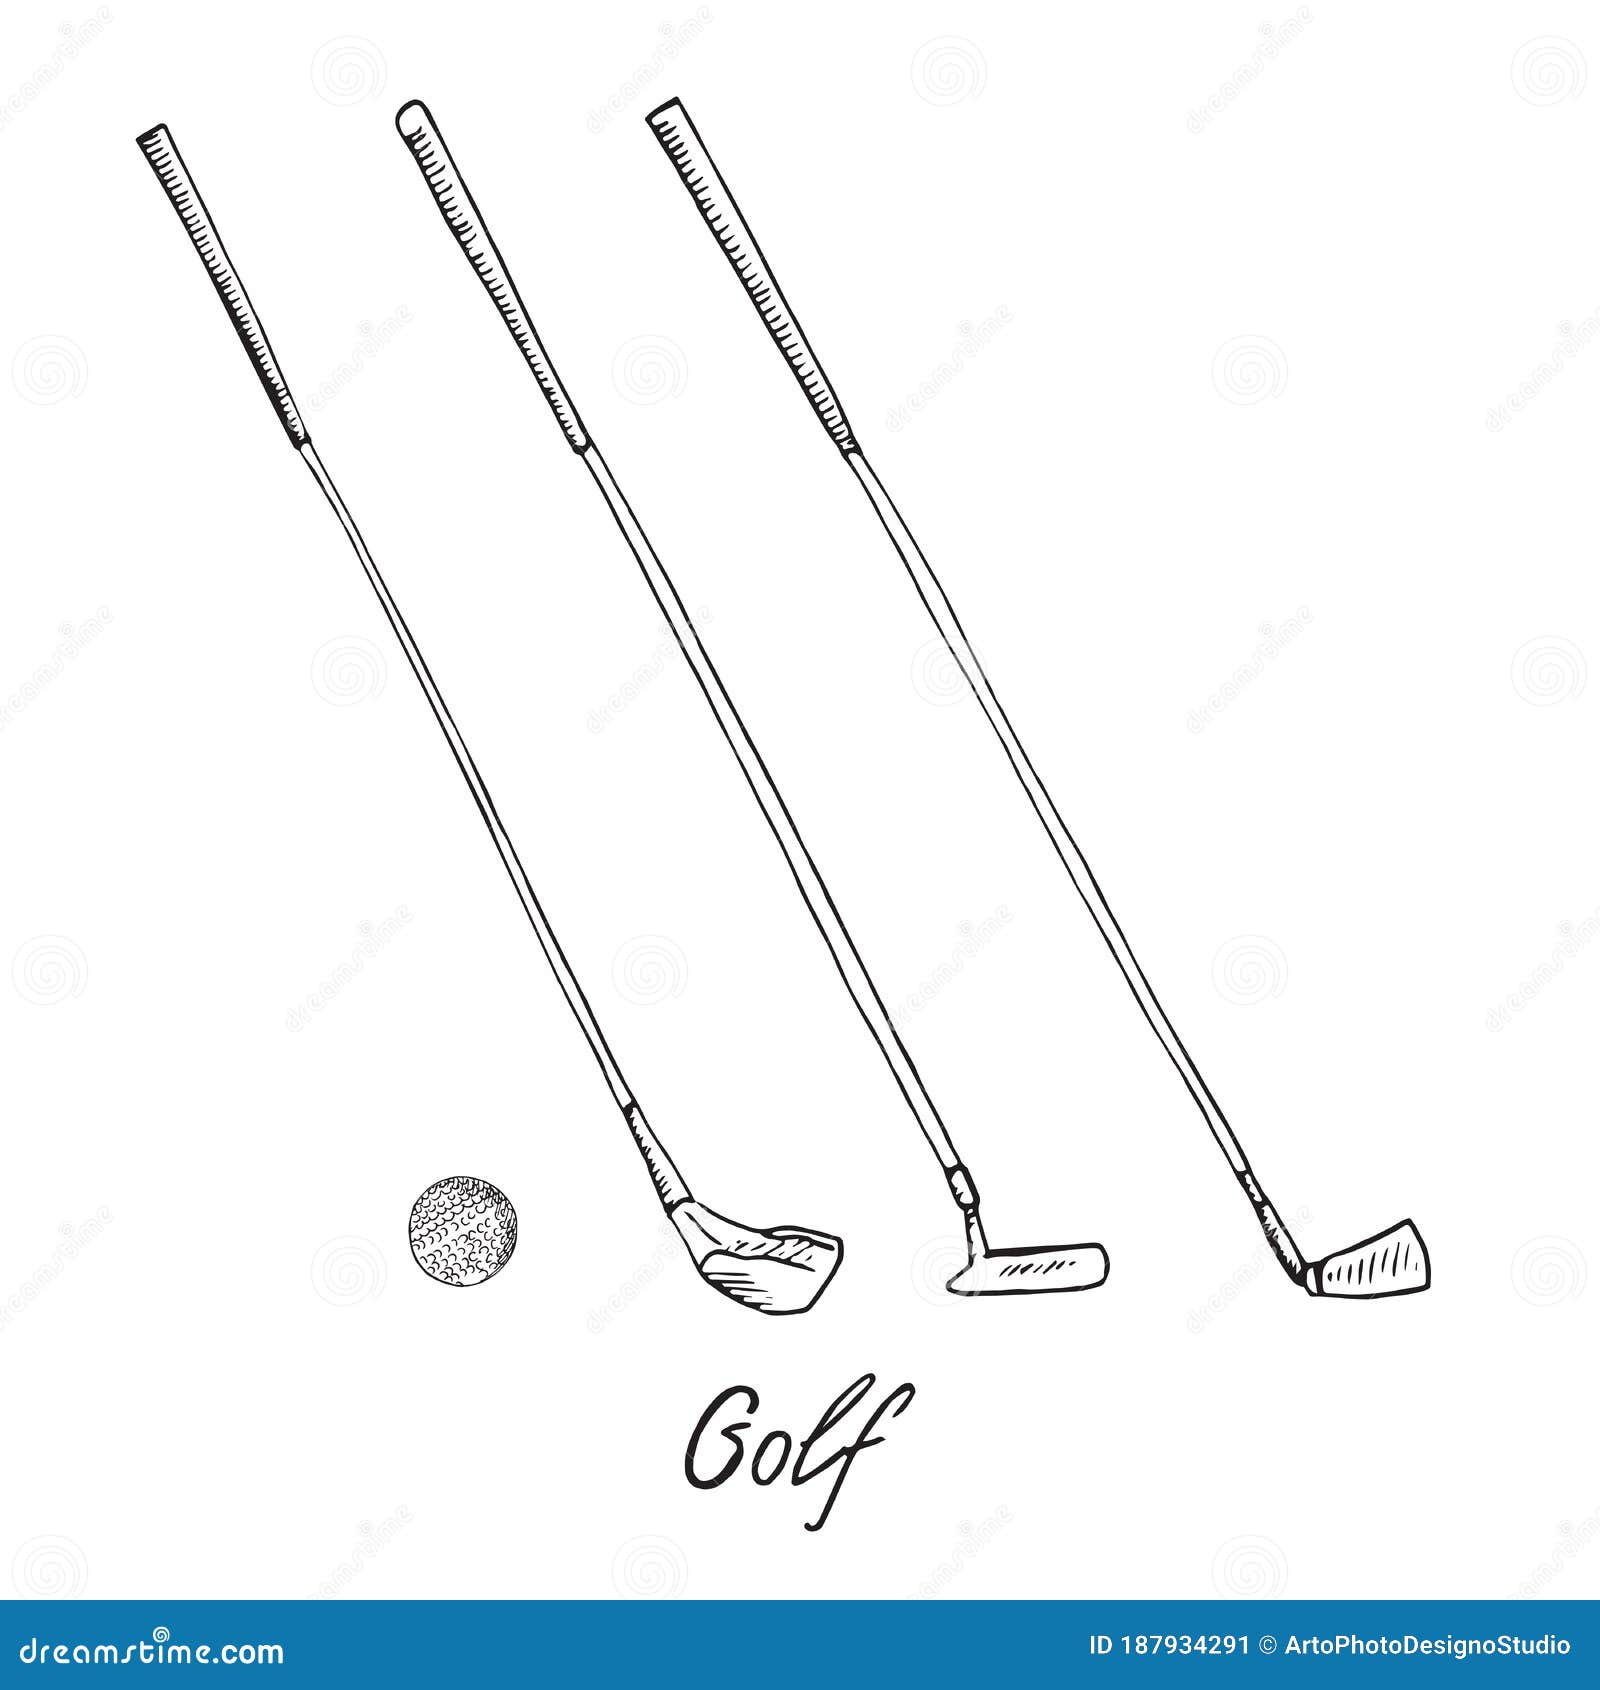 Different Golf Clubs Putters Wood, Putter, Wedge and Ball, Hand Drawn  Doodle Sketch with Inscription, Isolated Vector Outline Stock Vector -  Illustration of outdoors, drawing: 187934291